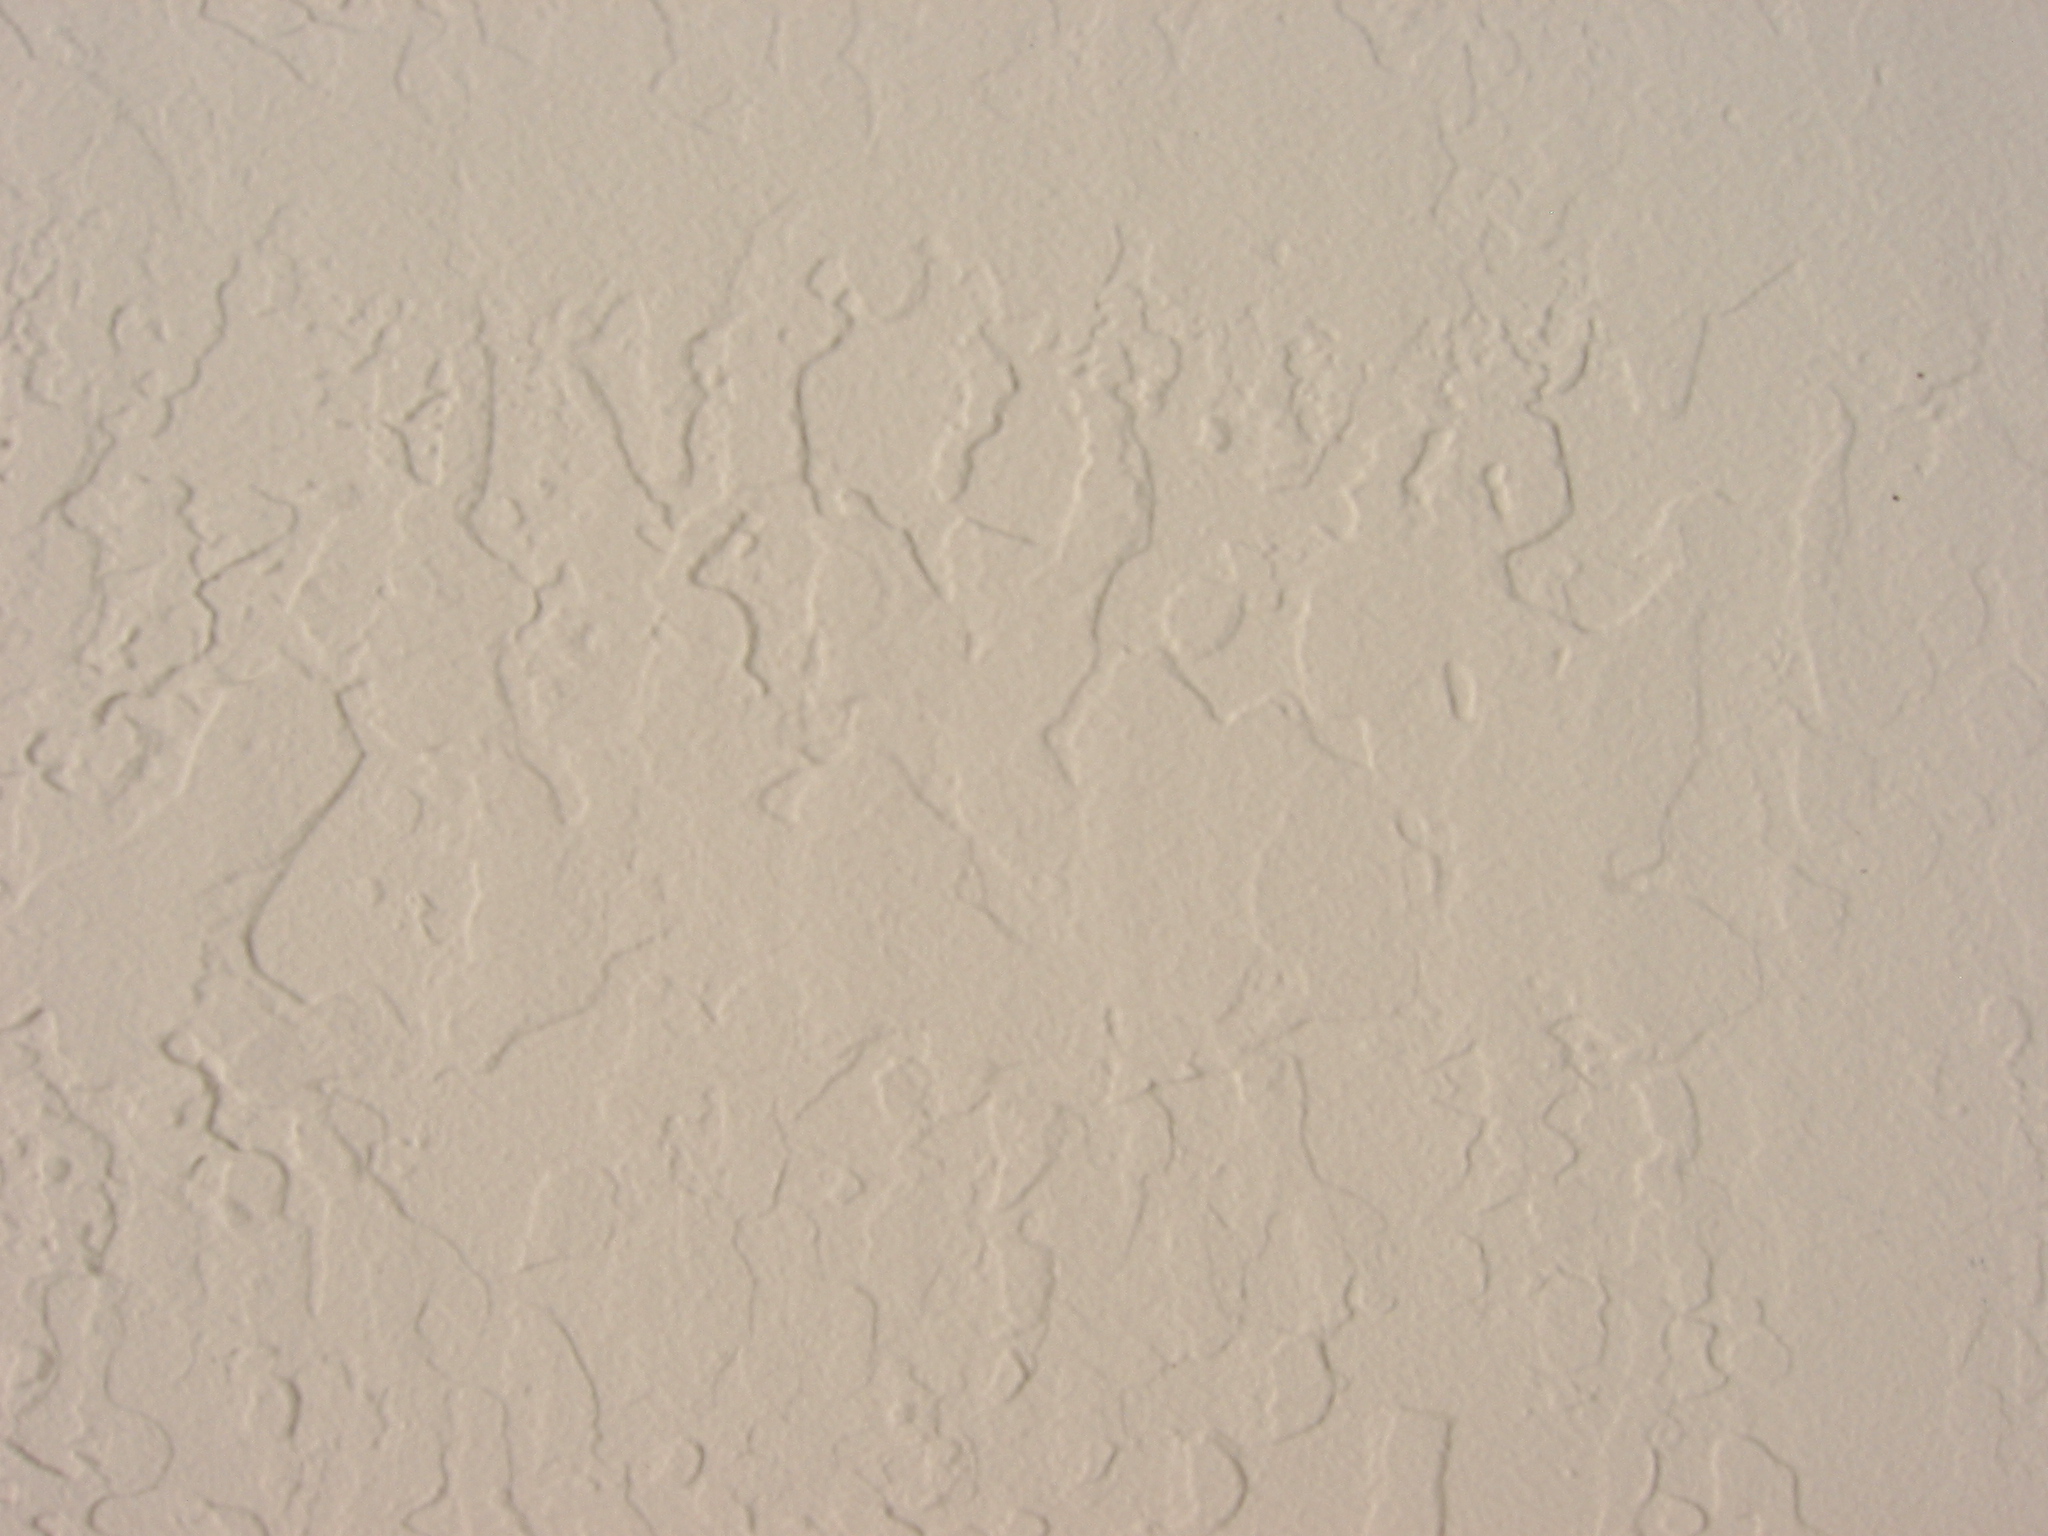 Kb Jpeg Spray Texture In Drywall Samples Can Match Any